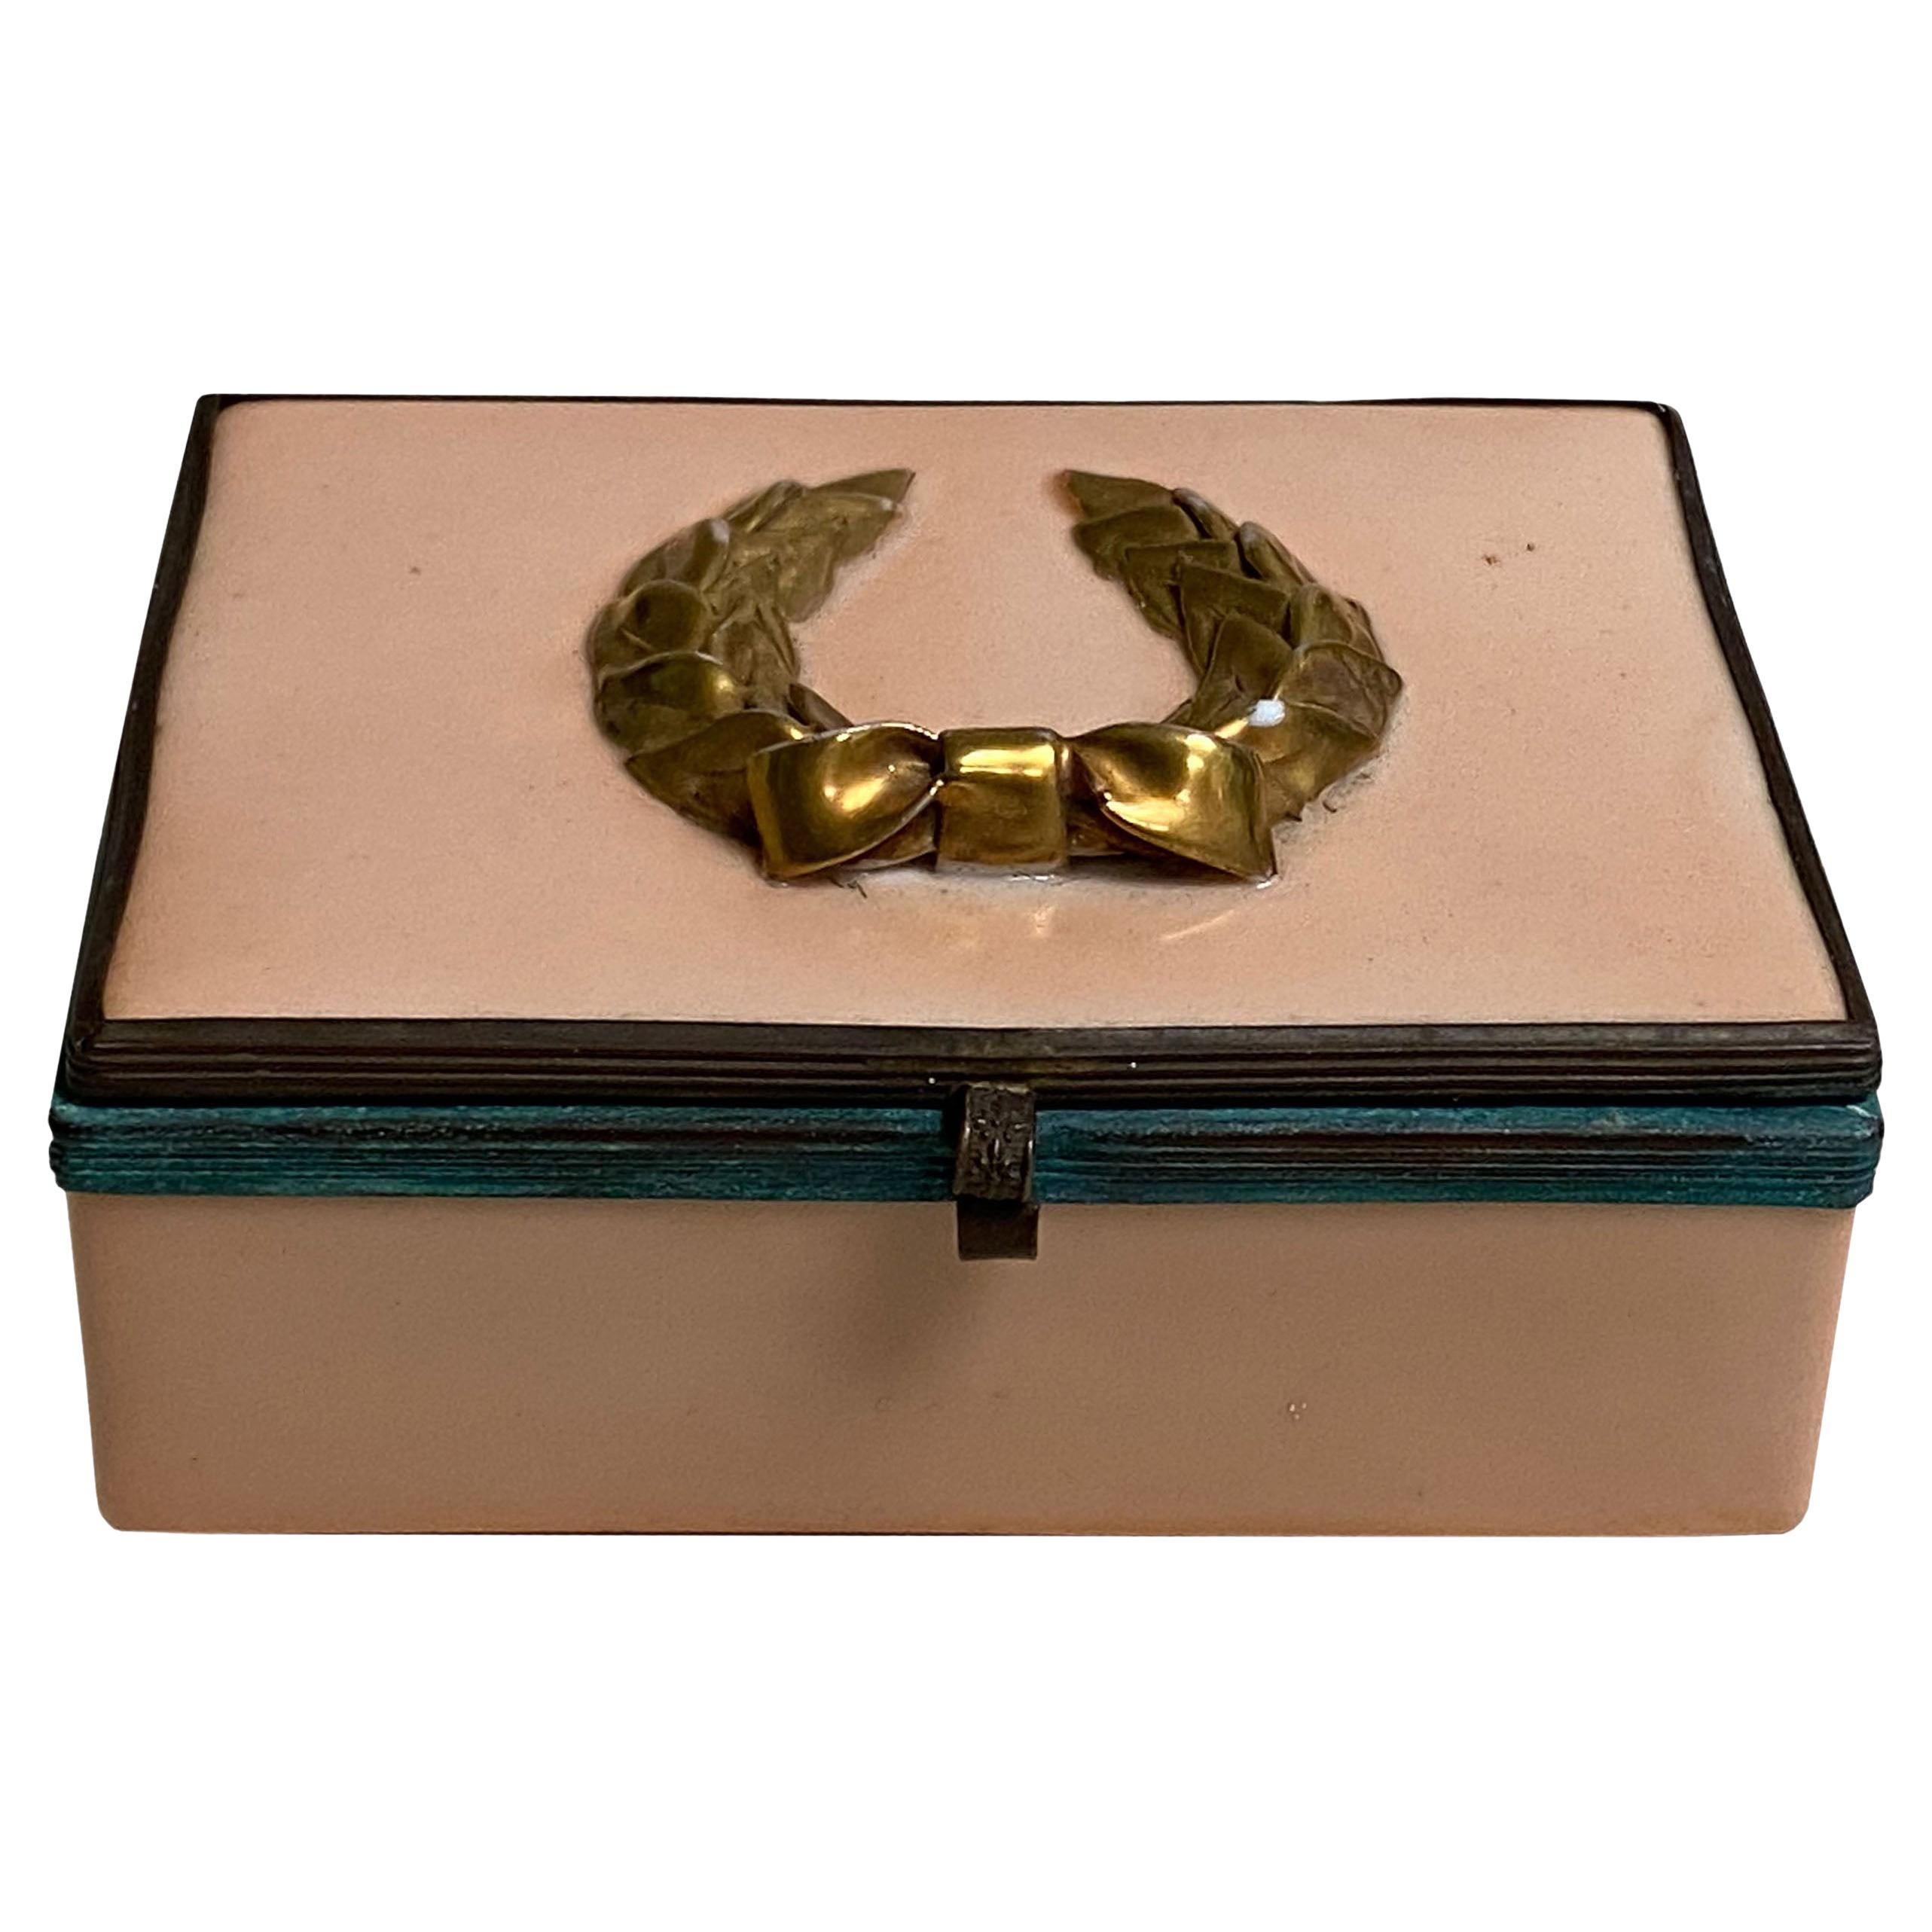 A salmon colored enamel box with patina bronze surround and latch and topped with a gold laurel wreath.